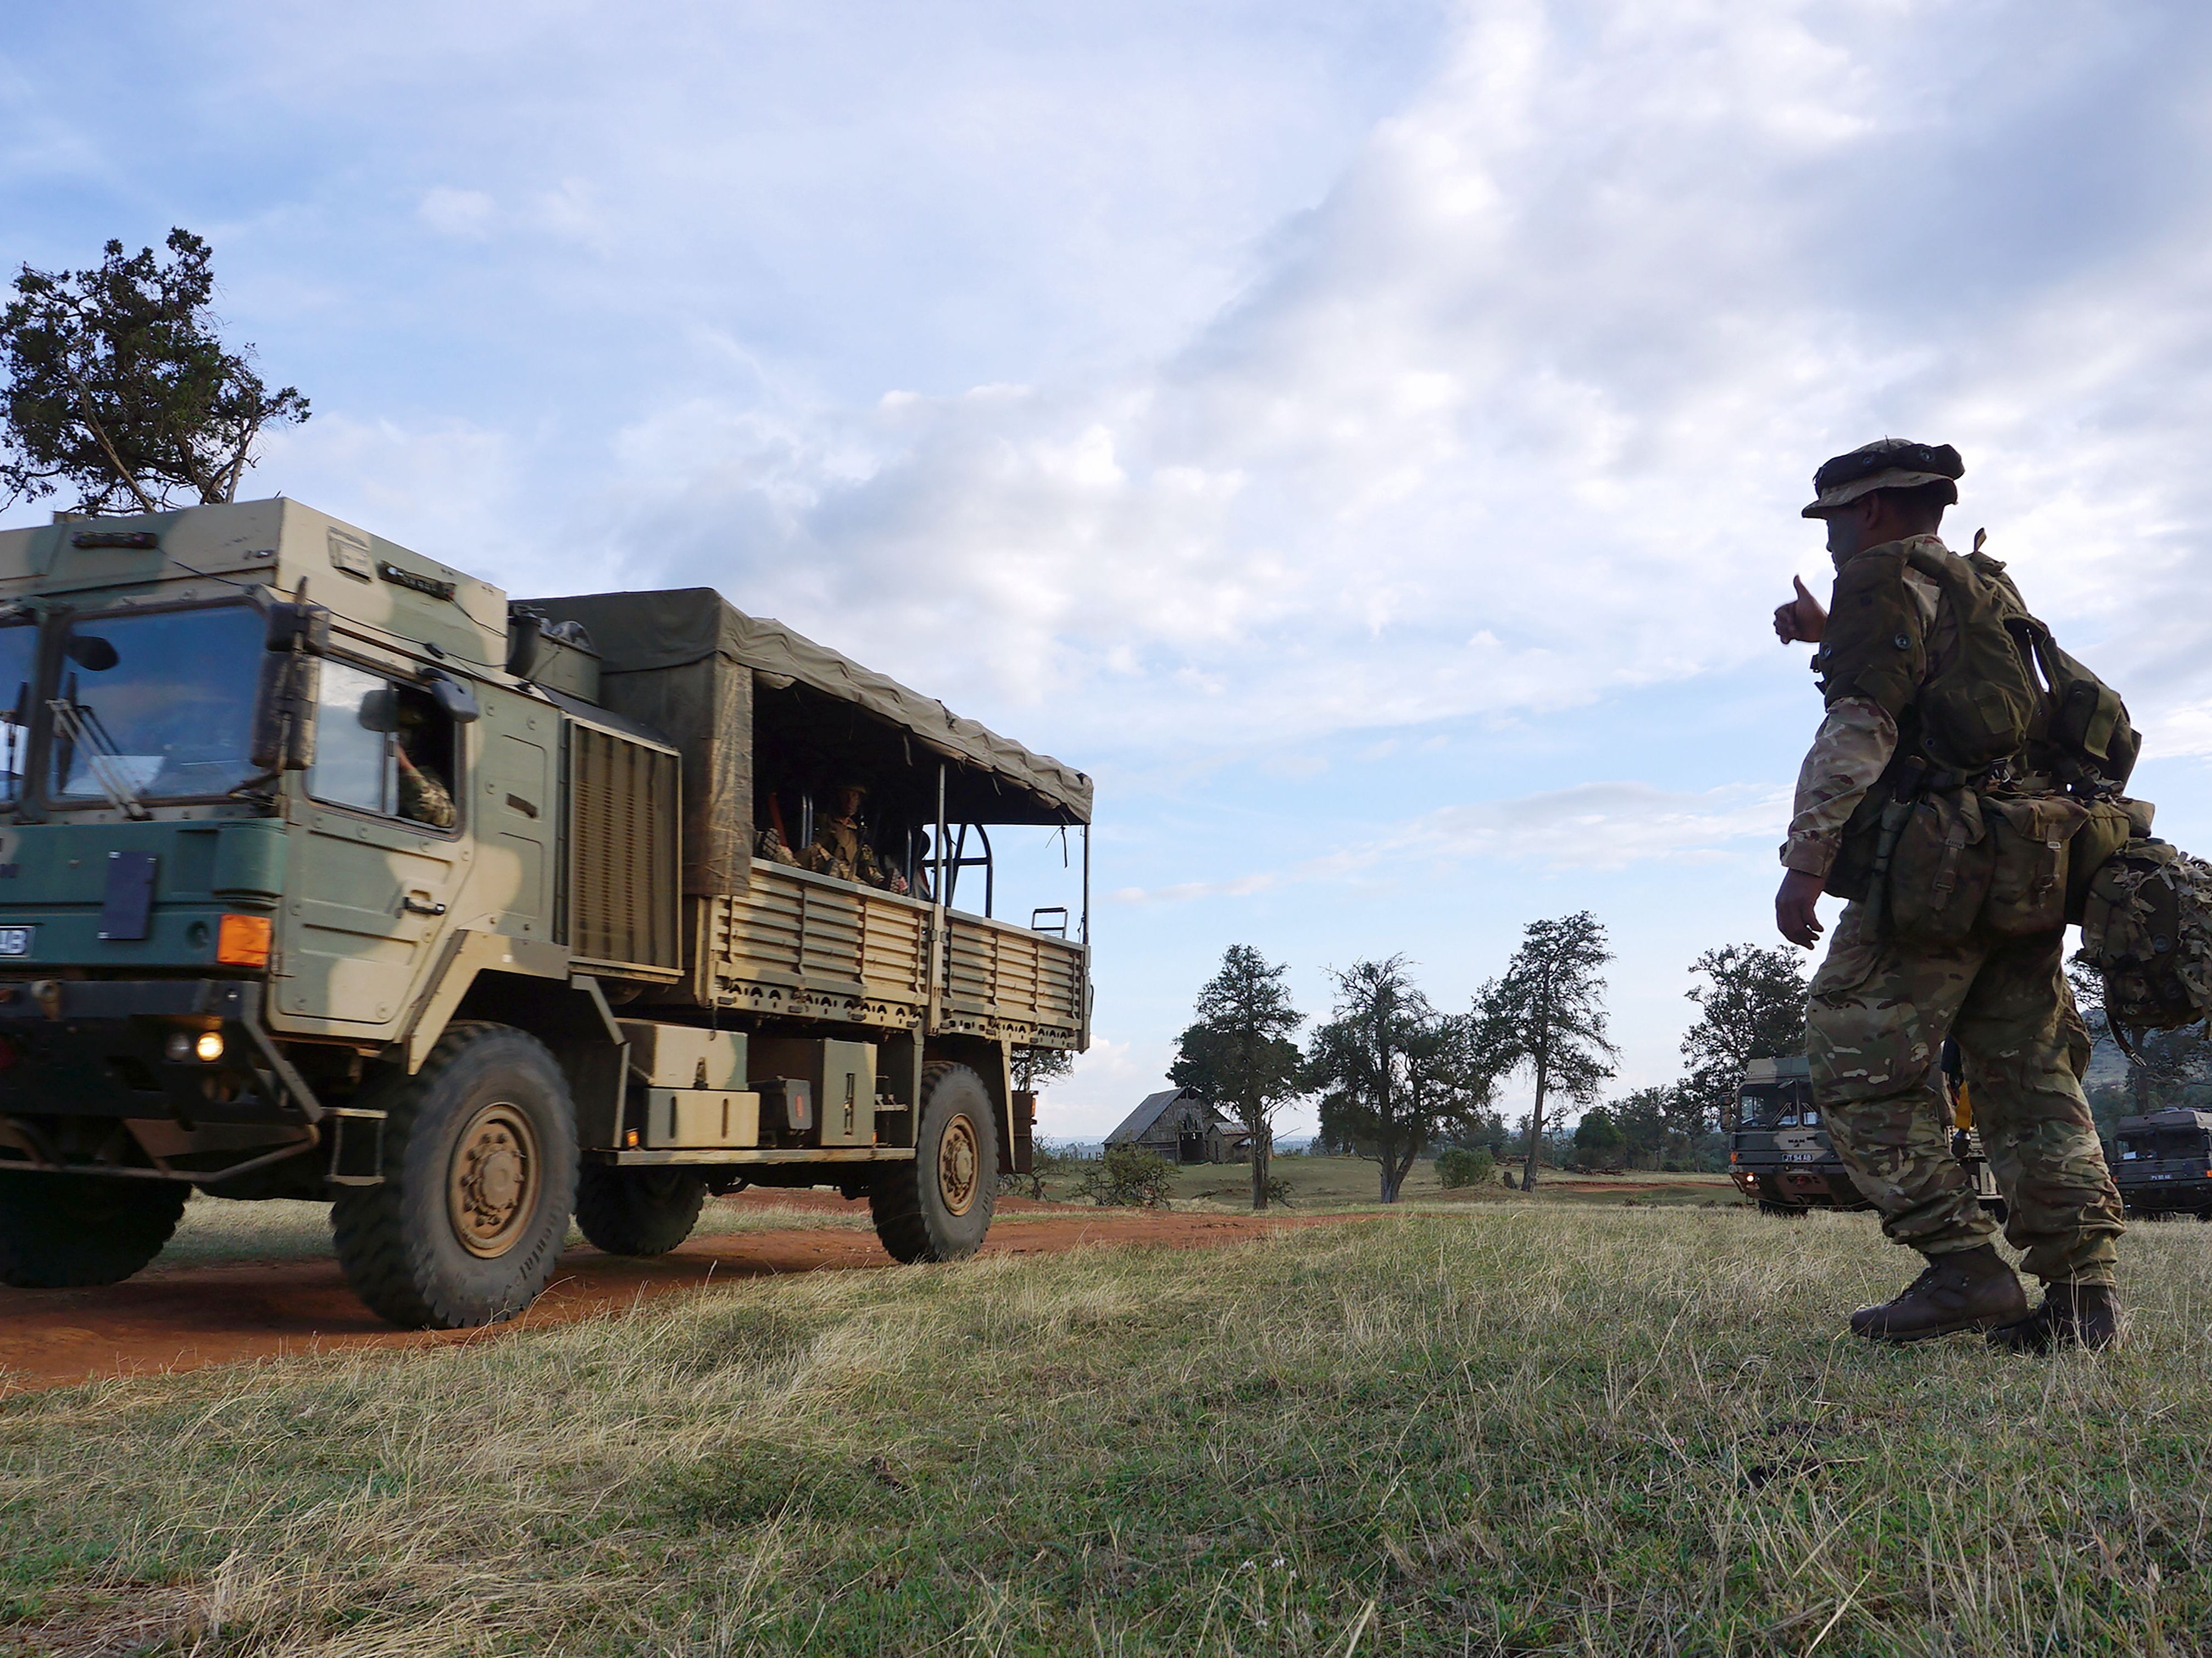 An unrelated photo shows soldiers taking part in a military excercise at the British Army Training Unit in Kenya